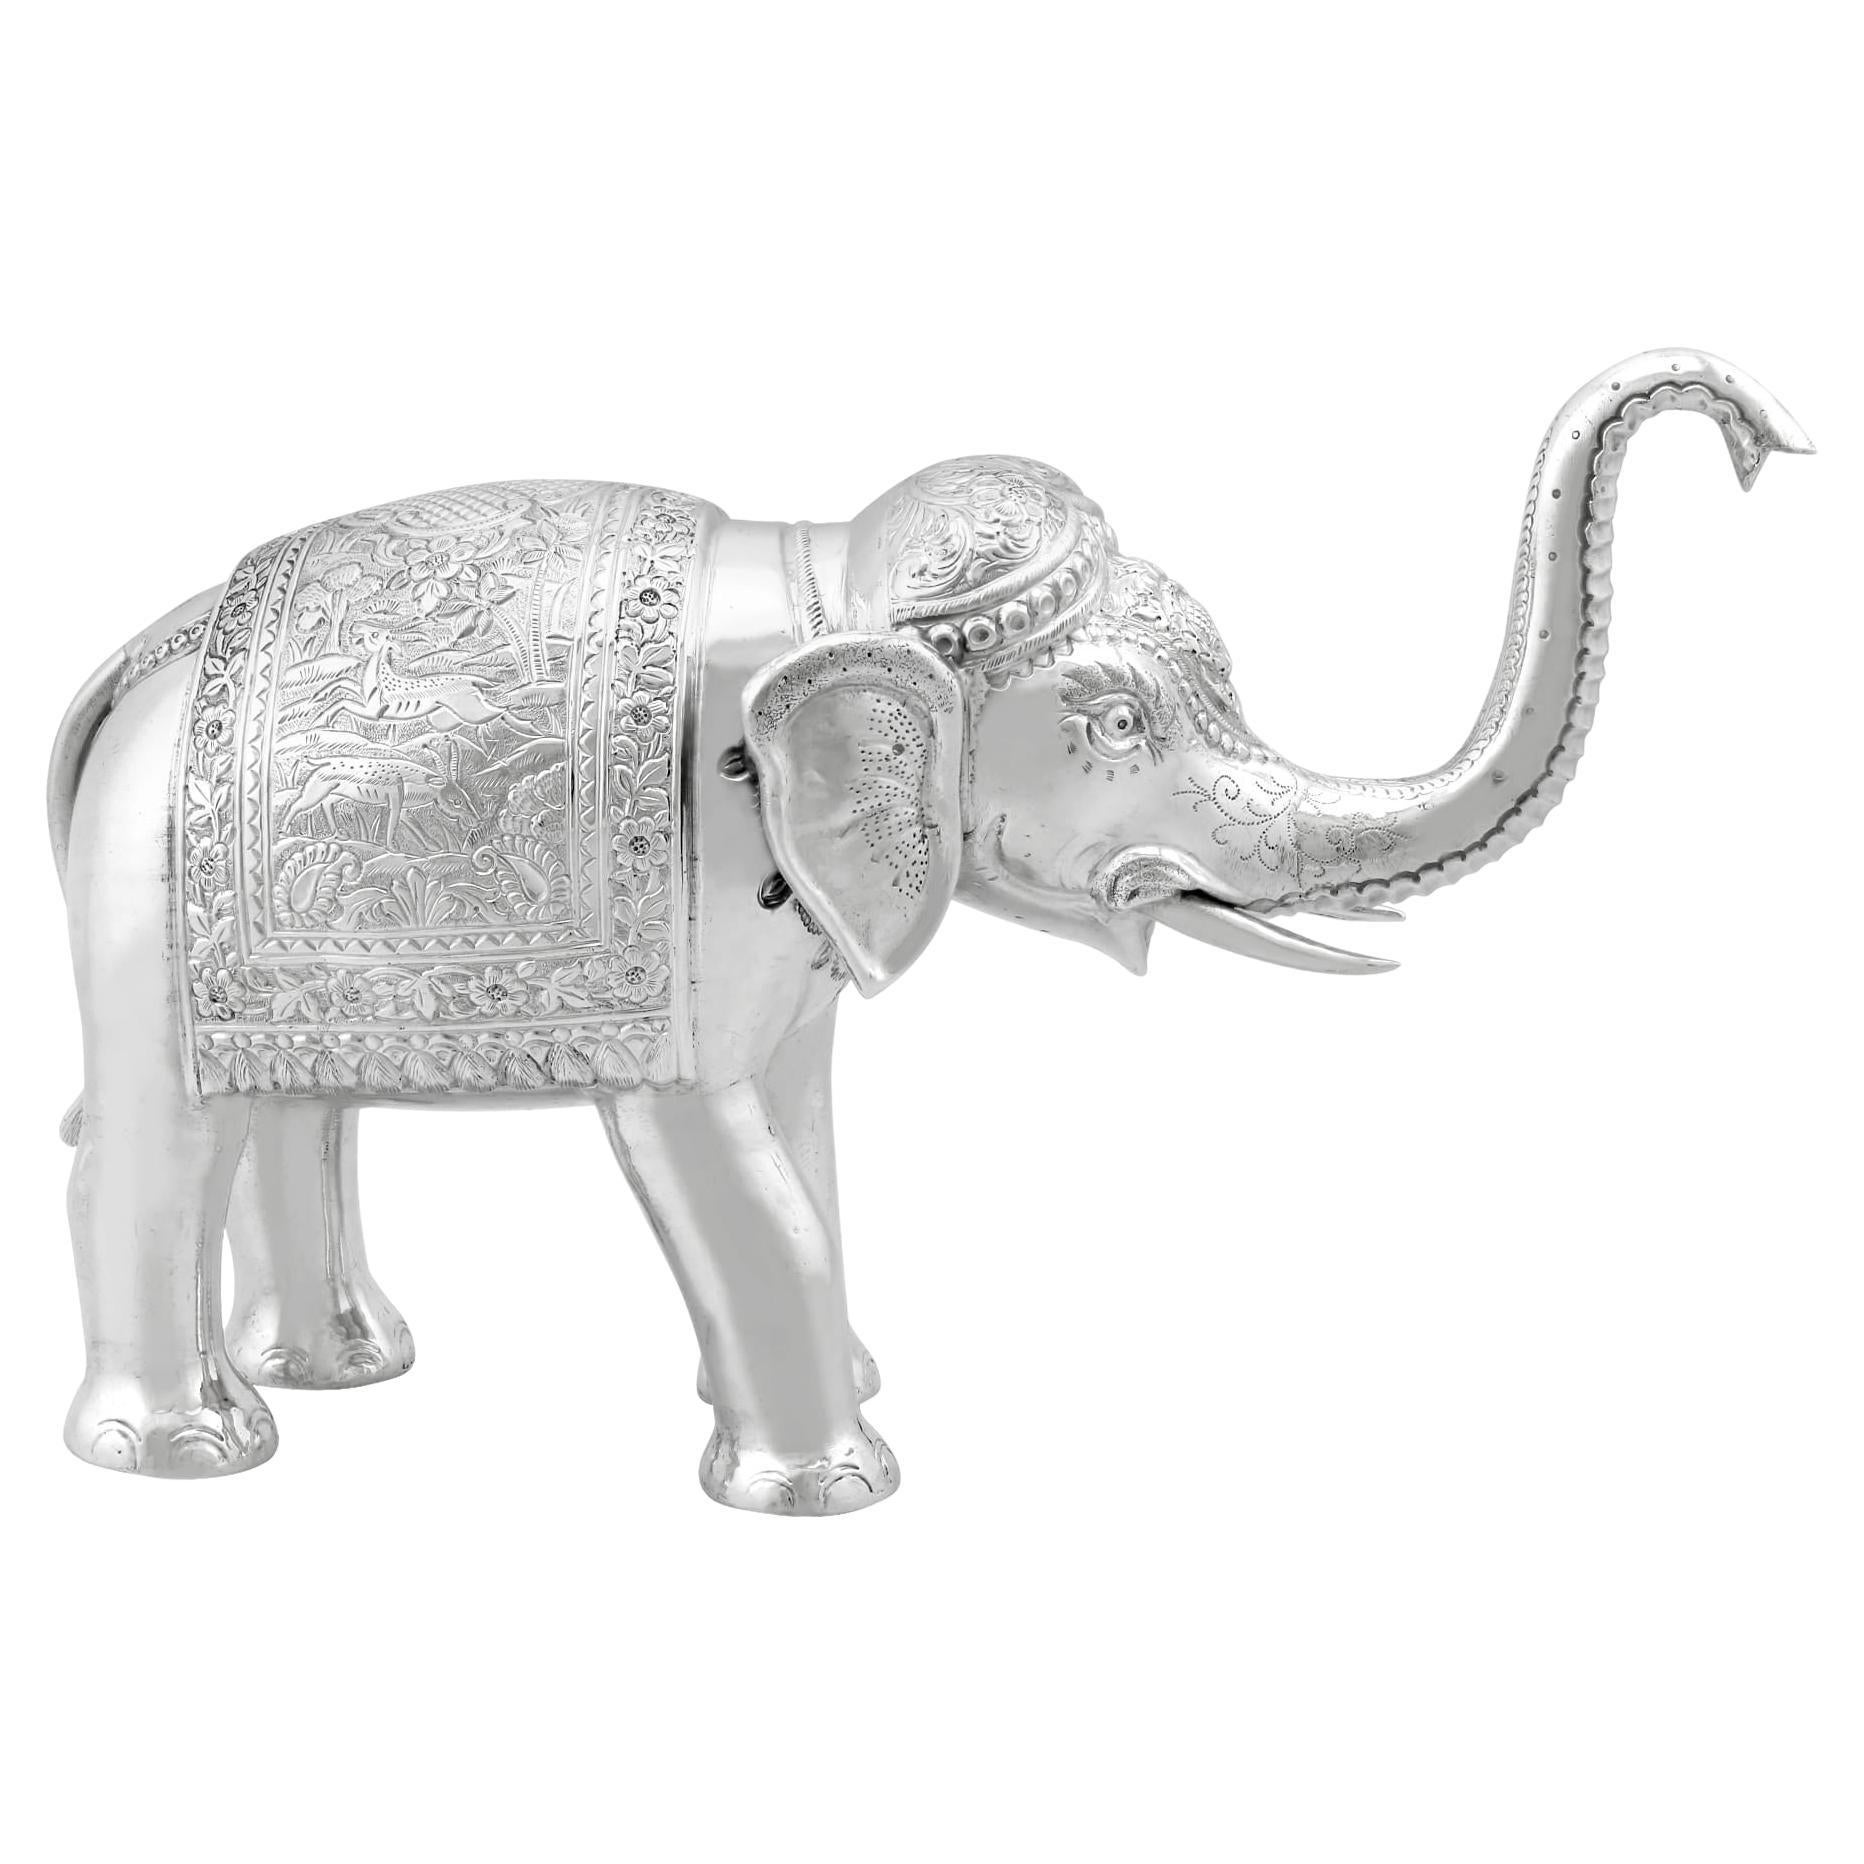 Vintage Indian Silver Elephant Table Ornament For Sale